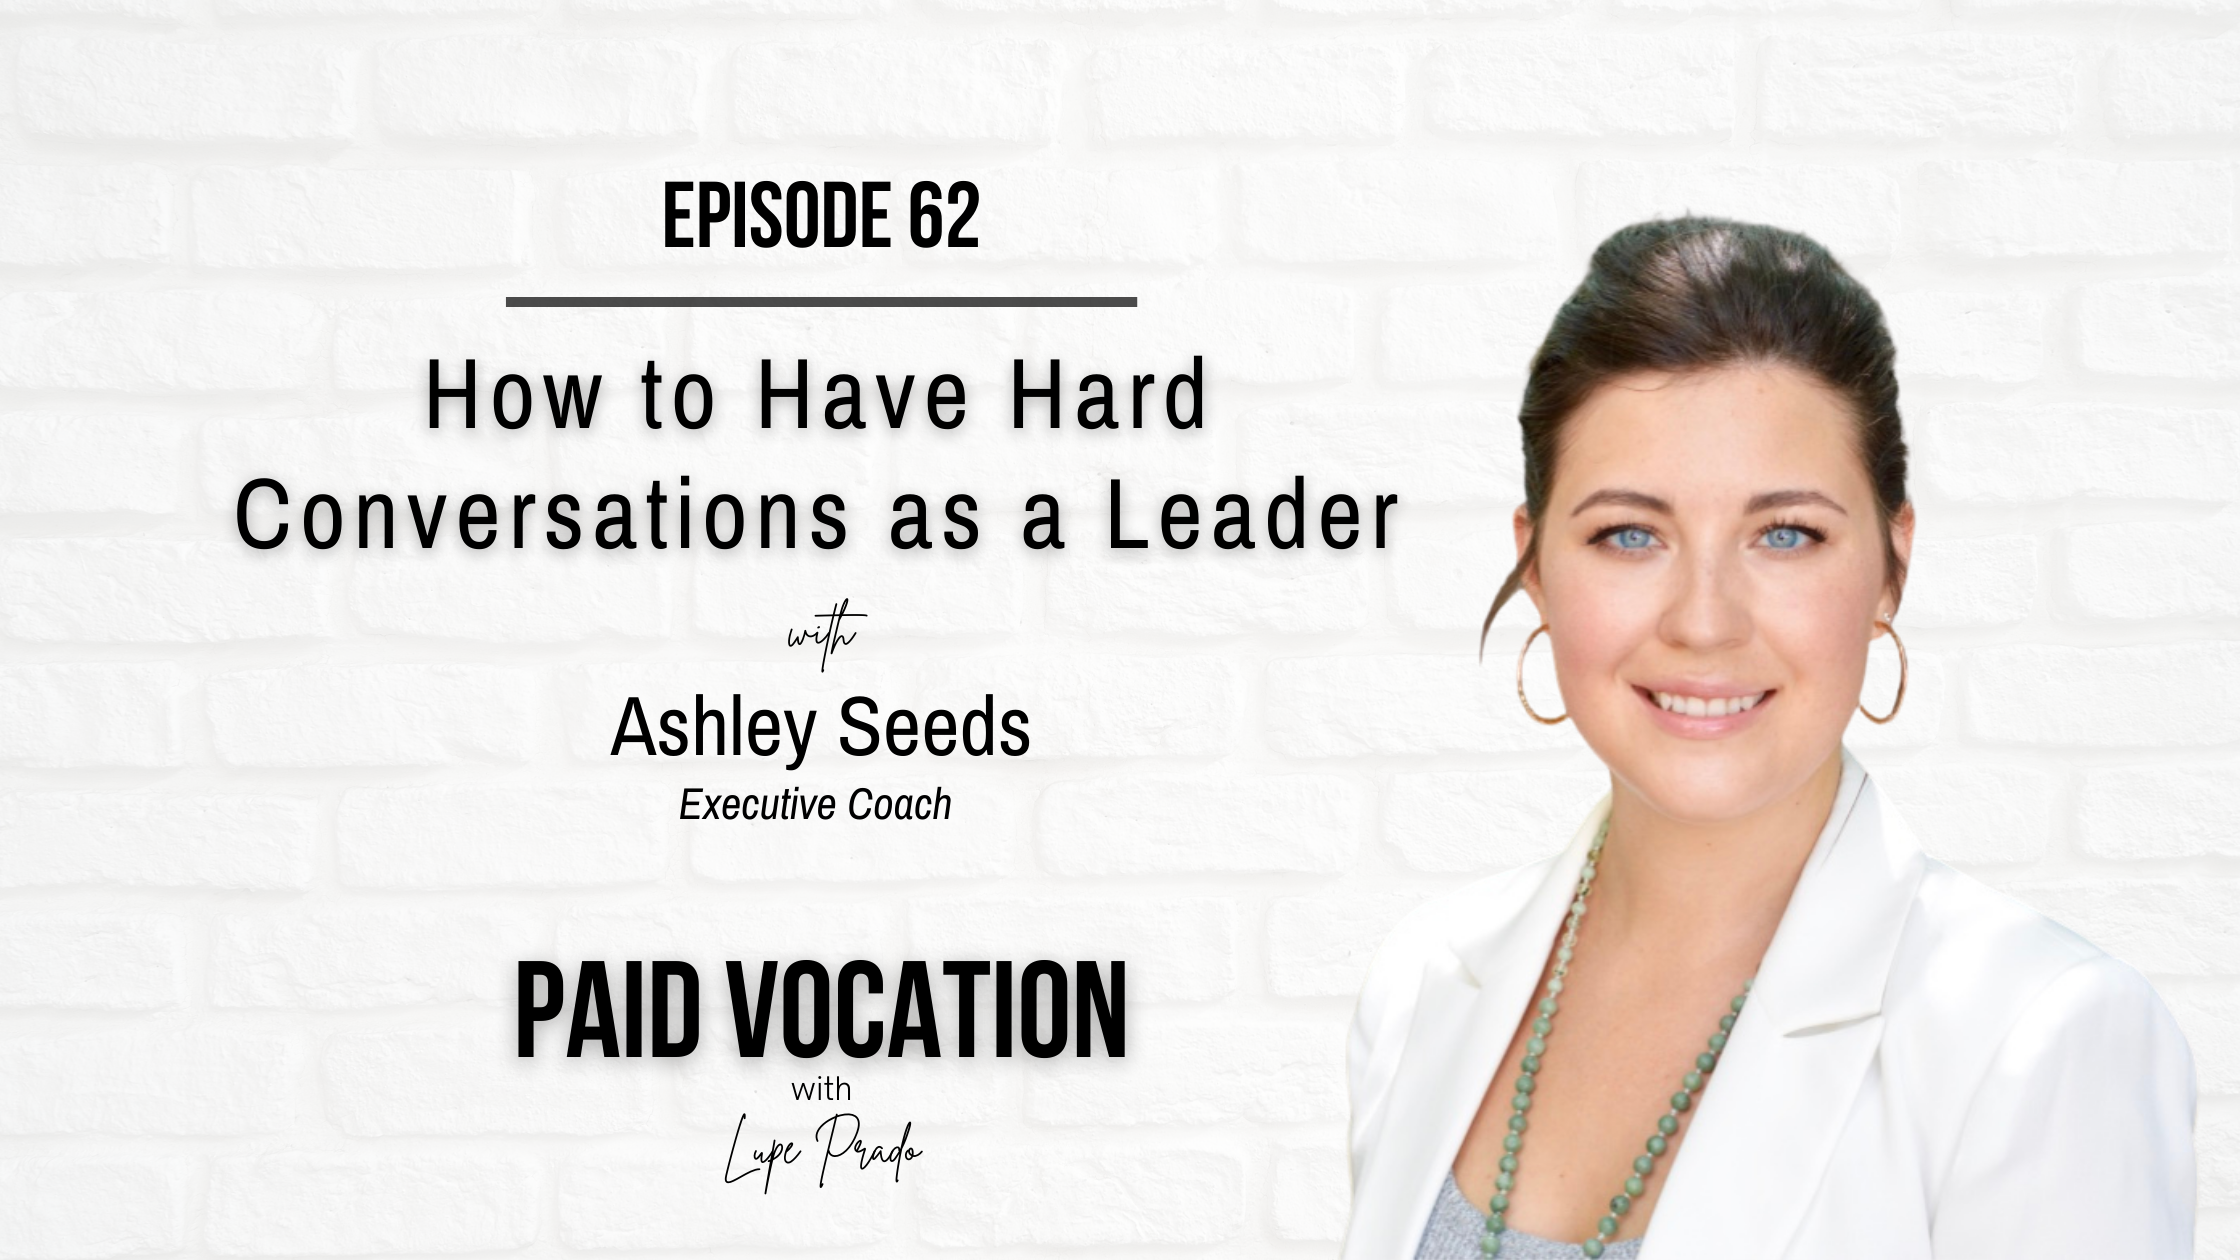 How to Have Hard Conversations as a Leader with Ashley Seeds - Paid Vocation